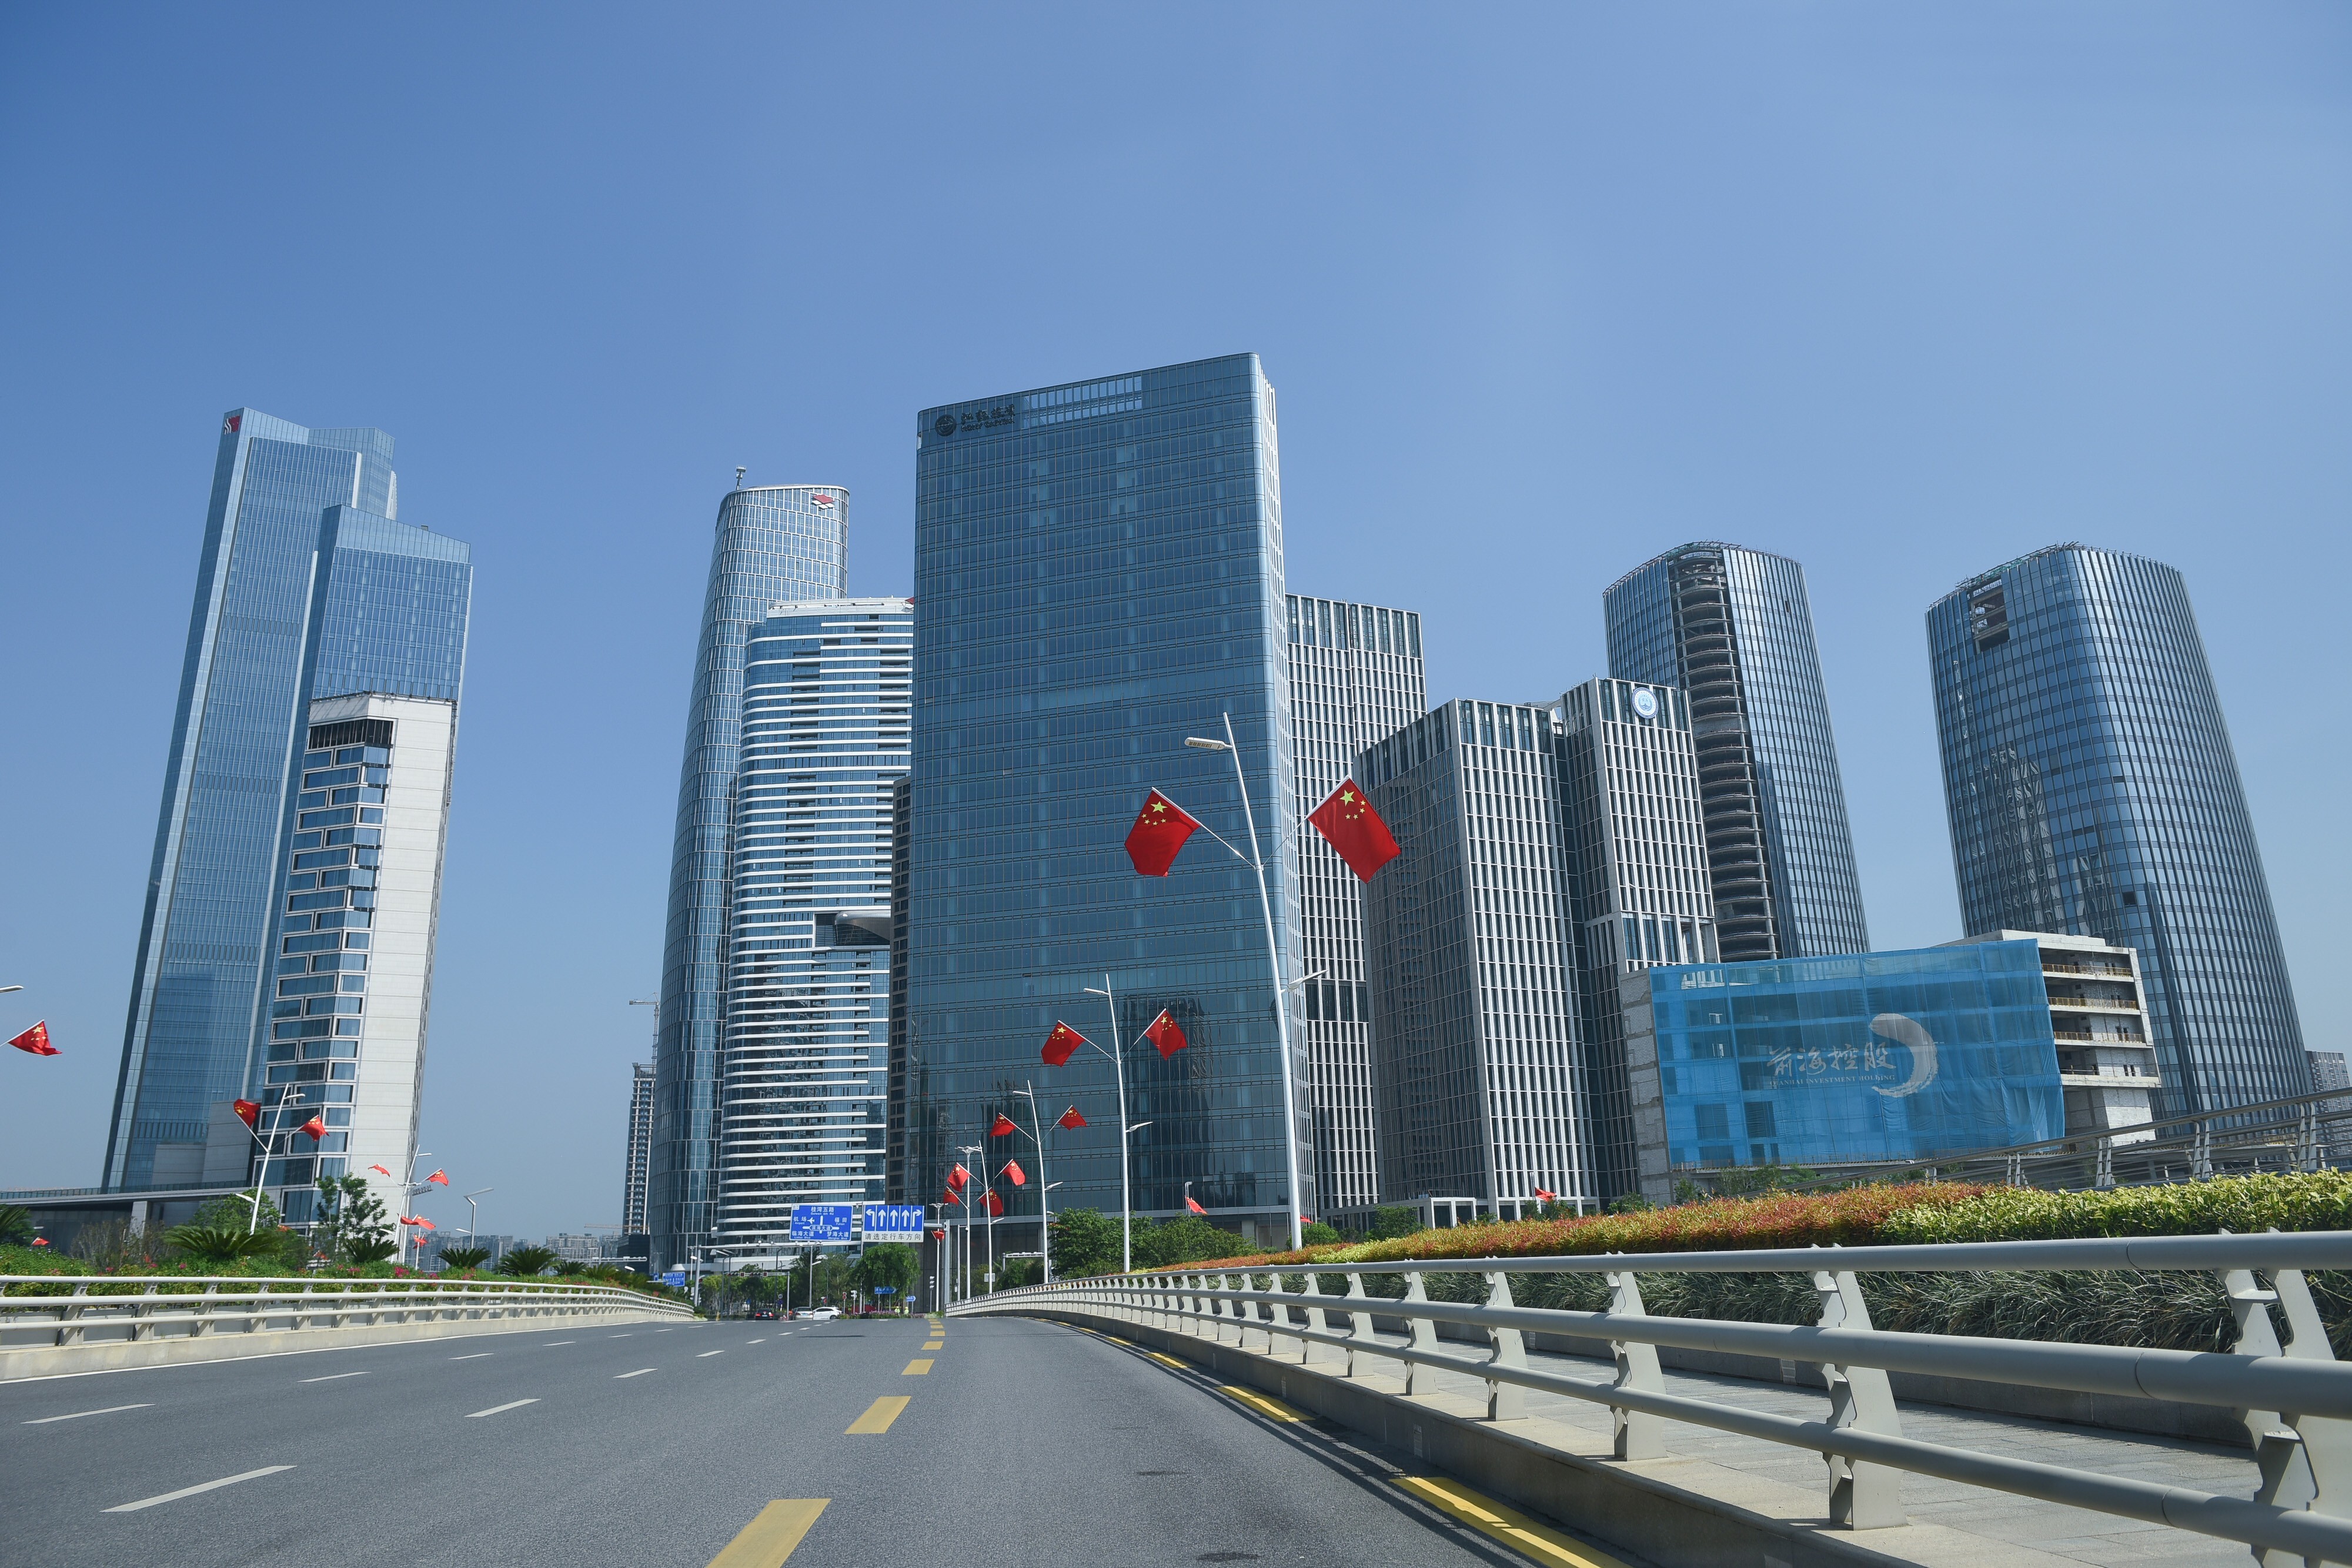 The Qianhai economic zone is to be expanded eightfold. Photo: VCG via Getty Images